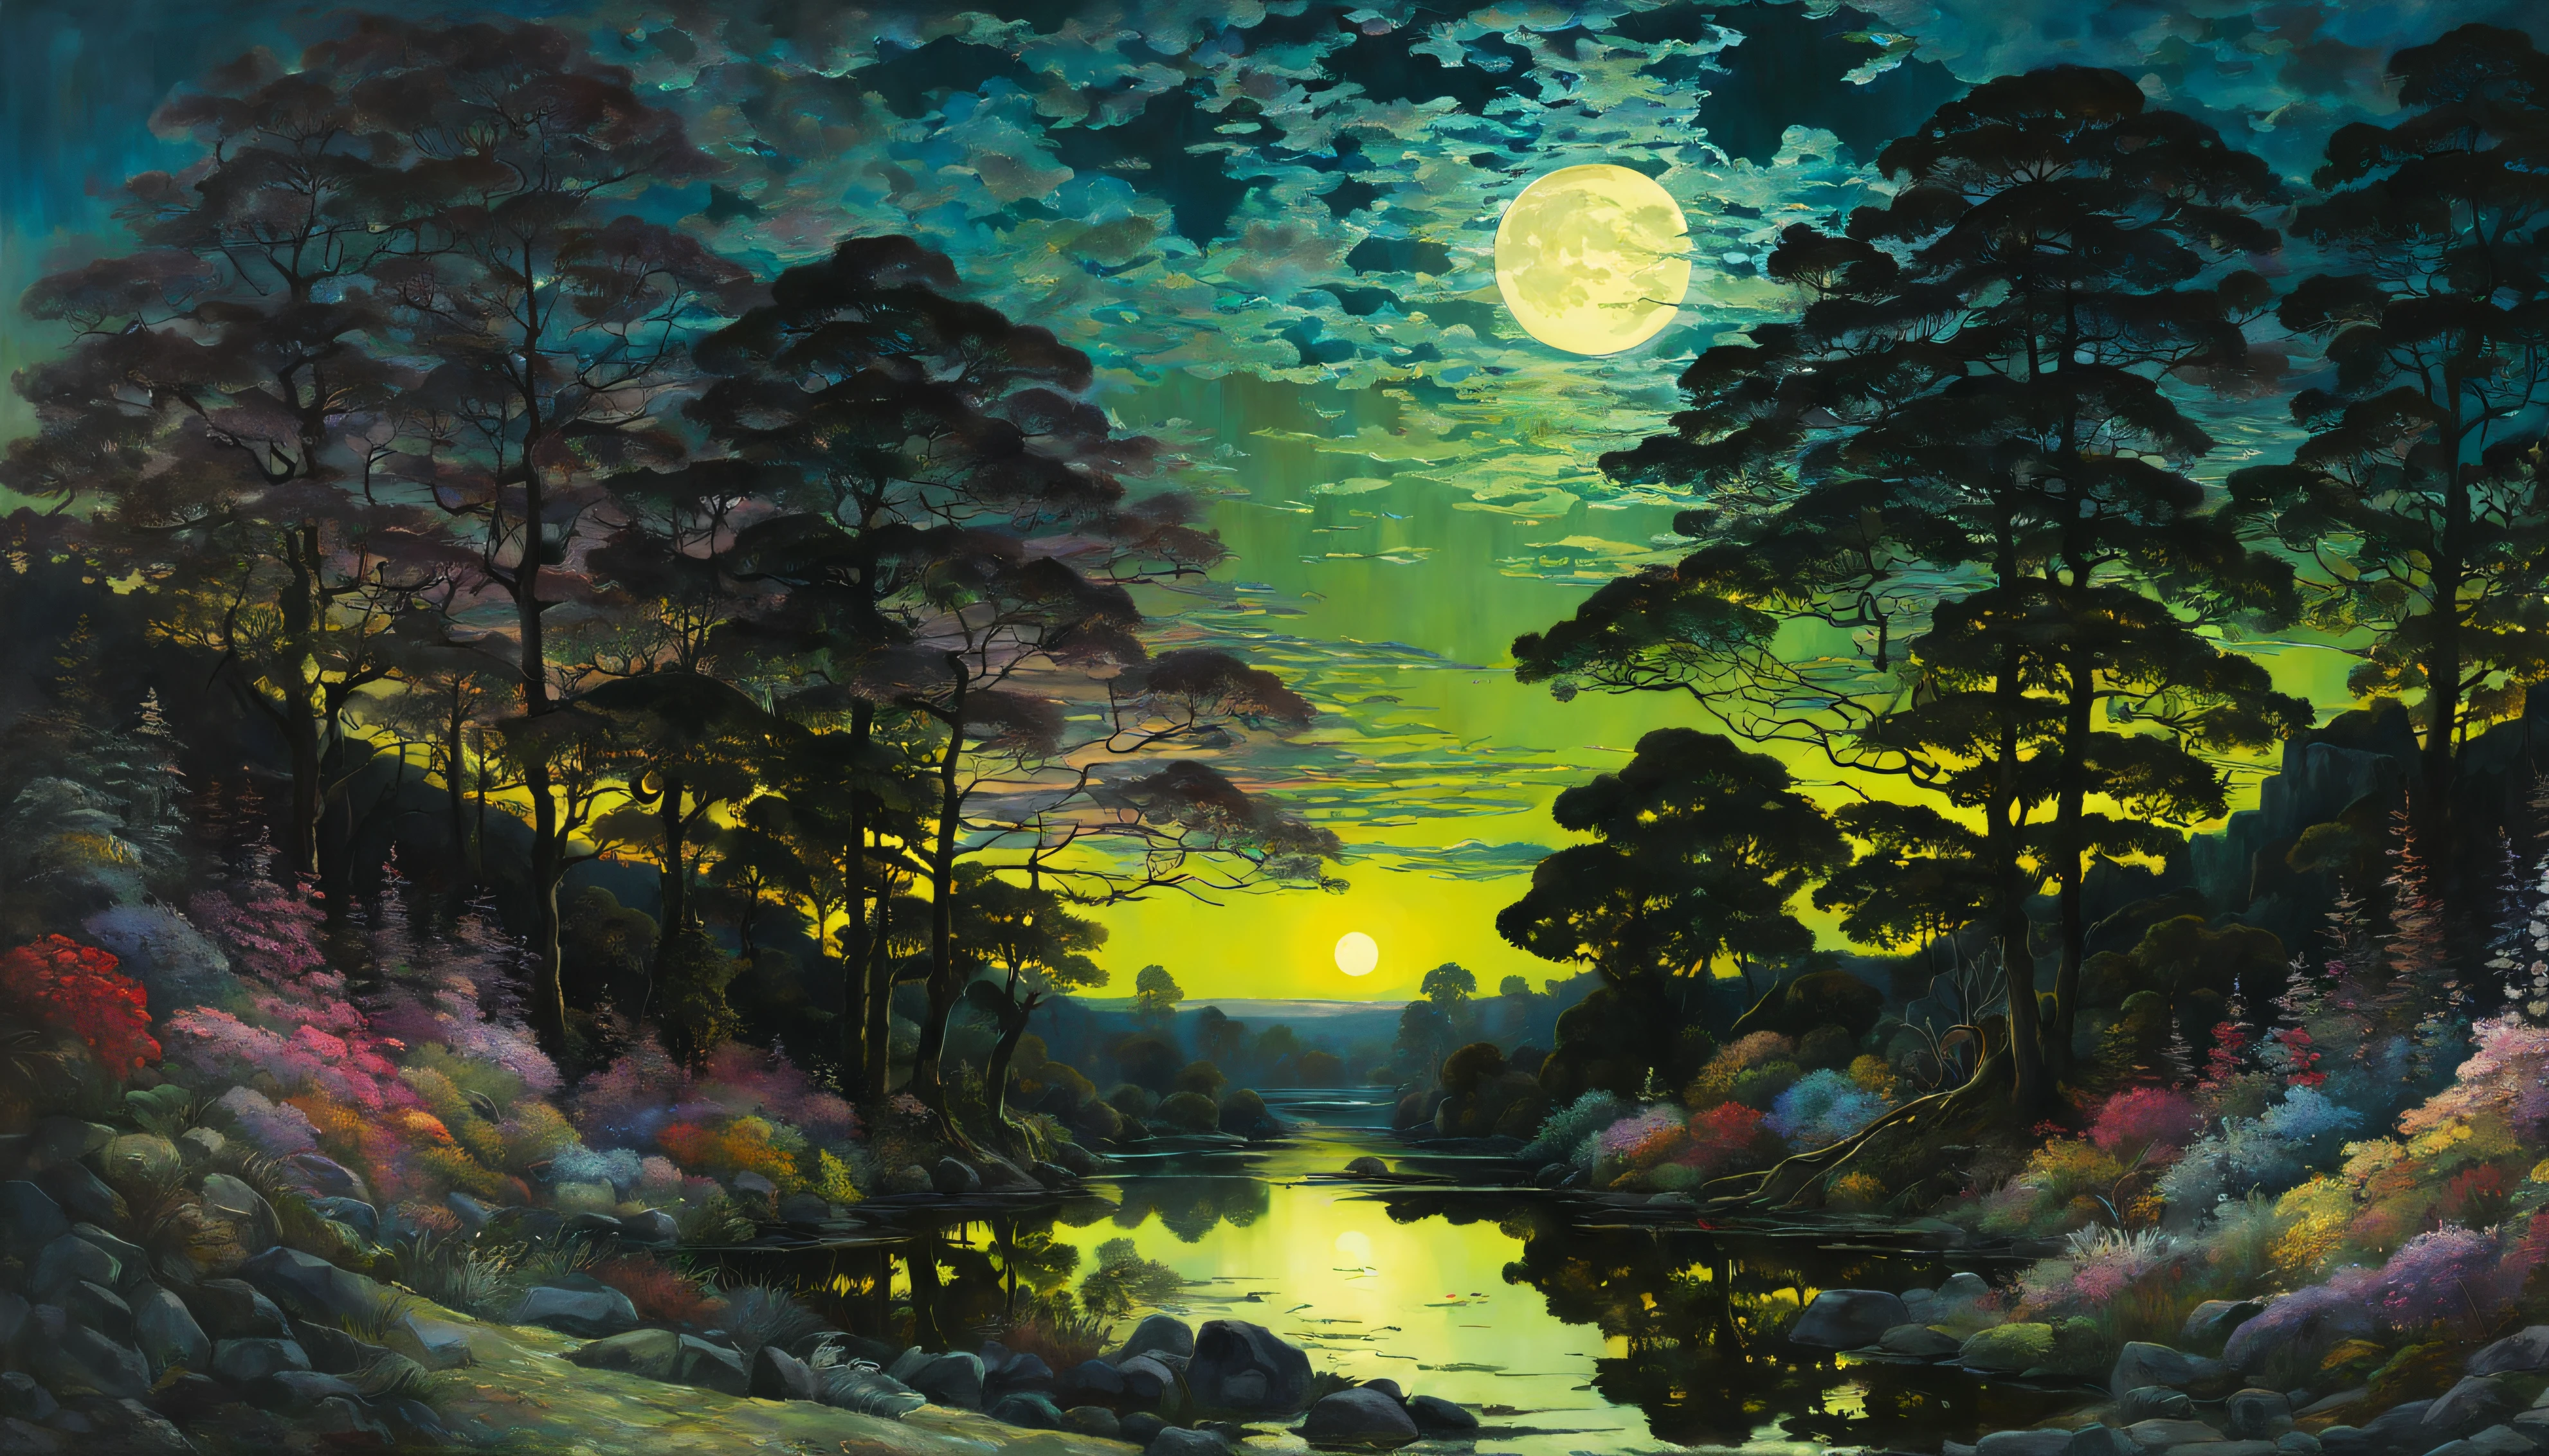 jjohn atkinson grimshaw style painting of night The moonlight shines down, casting eerie shadows on the landscape. The garden is filled with various flowers, their vibrant colors contrasting against the darkness. The painting style resembles the works of John Atkinson Grimshaw, with a focus on intricate details and a touch of romanticism. The colors are rich and vivid, adding depth to the overall composition. The lighting in the painting accentuates the mysterious and enchanting ambiance, creating a sense of anticipation and intrigue. The art captures the essence of the night, with a perfect balance of realism and imagination.